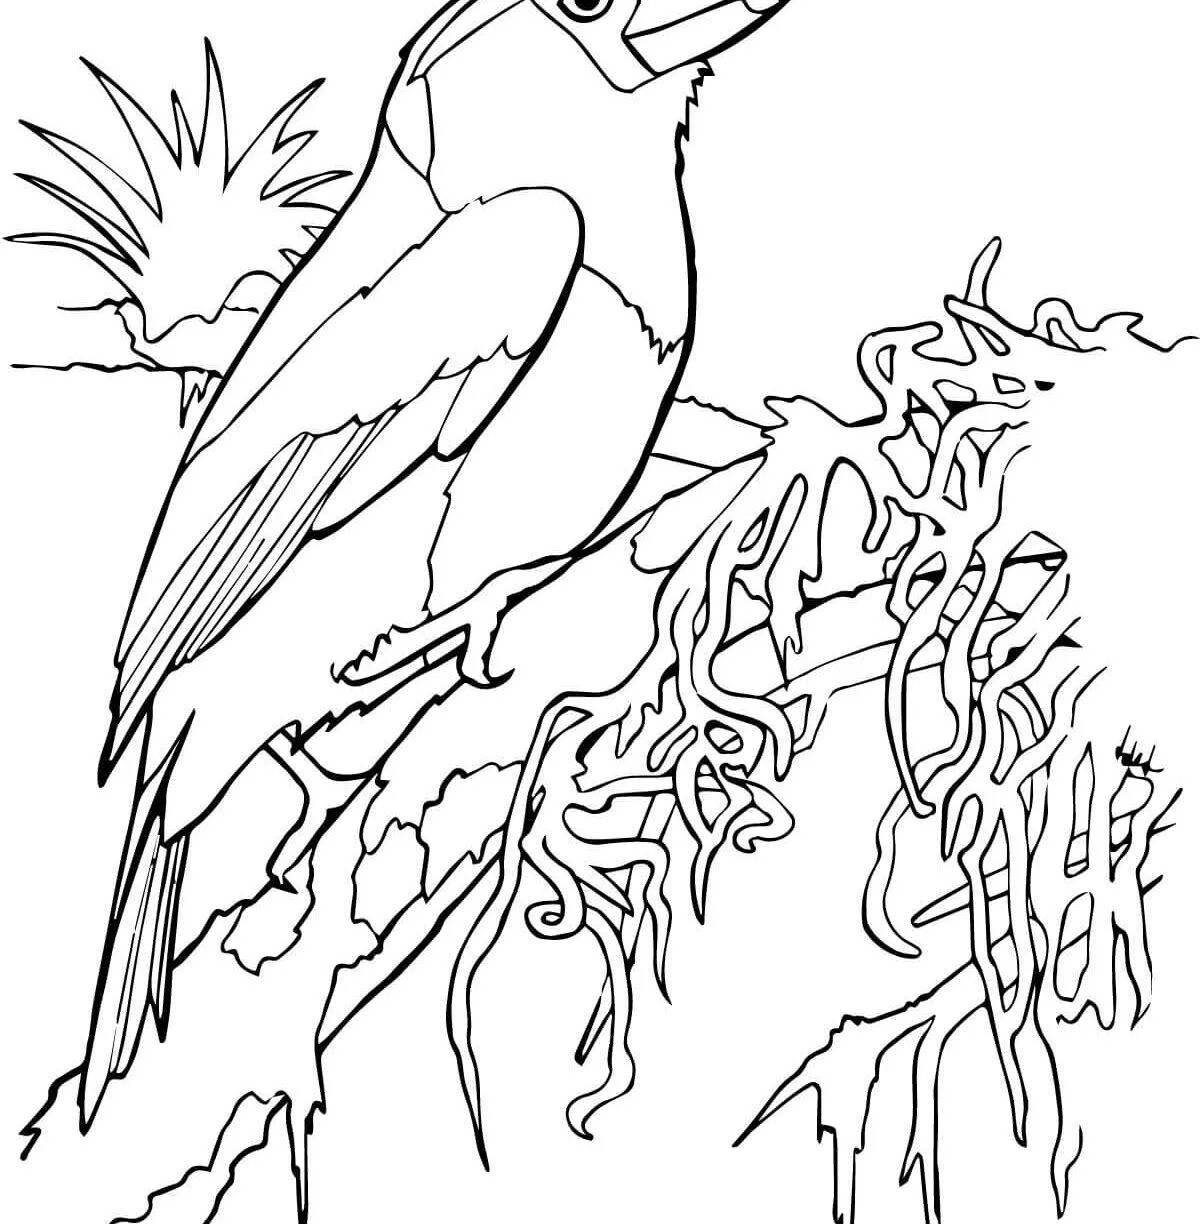 Coloring book shining goldfinch